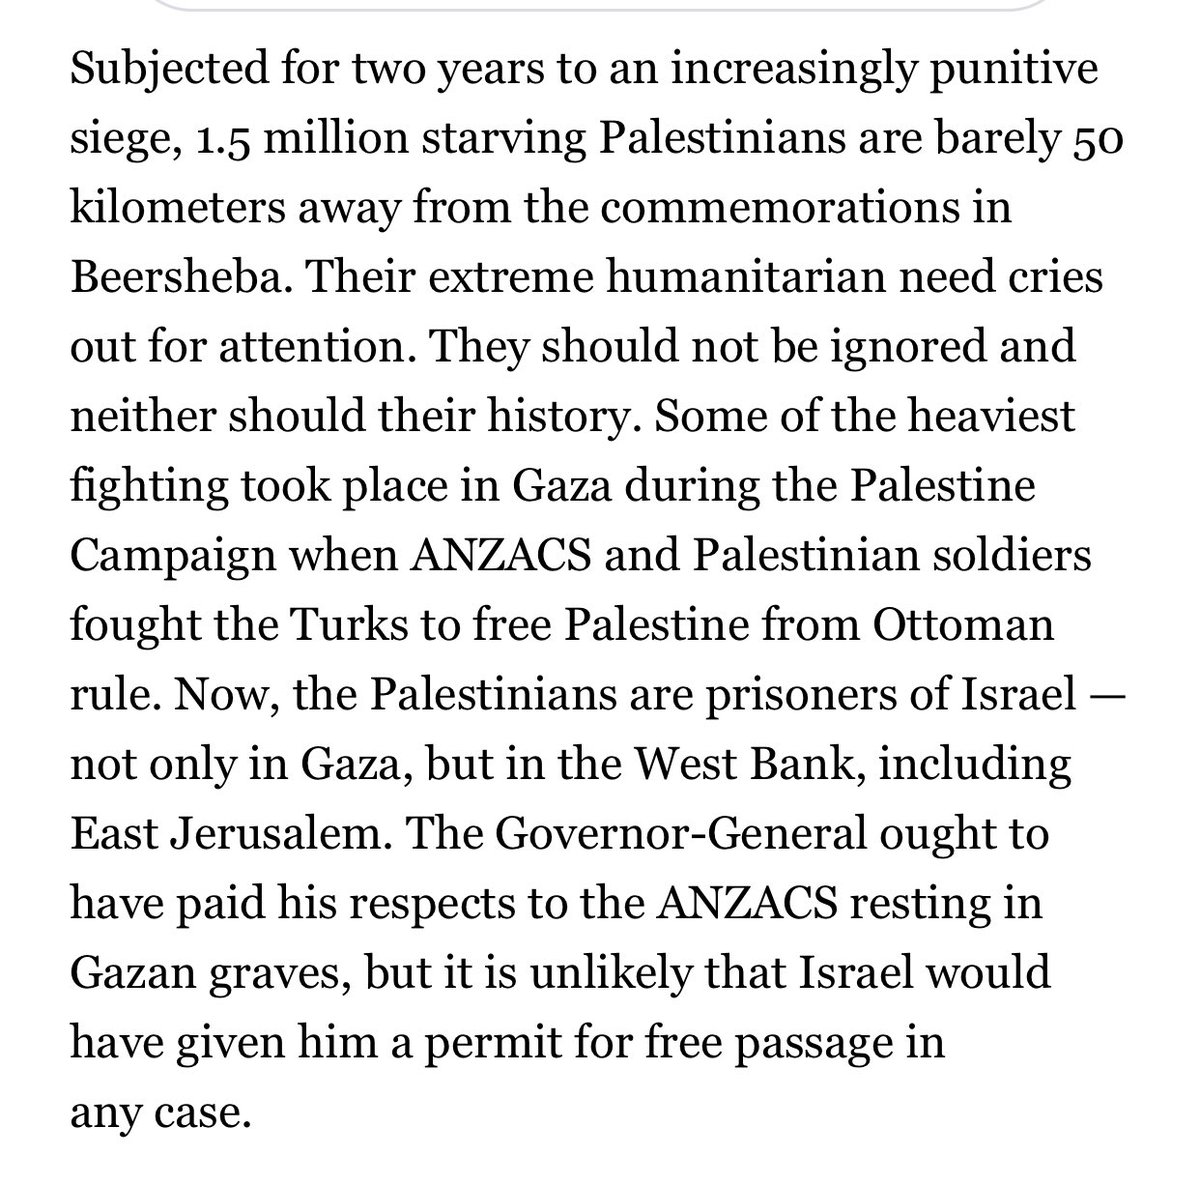 @RichardMarlesMP Many ANZACS are buried in war cemeteries throughout Palestine, two of which can be found in Gaza — one beautifully cared for in the Palestinian town of Deir al-Balah, and the other in Gaza City. The Beersheba Commonwealth War Cemetery has graves of some 175 Australian soldiers.